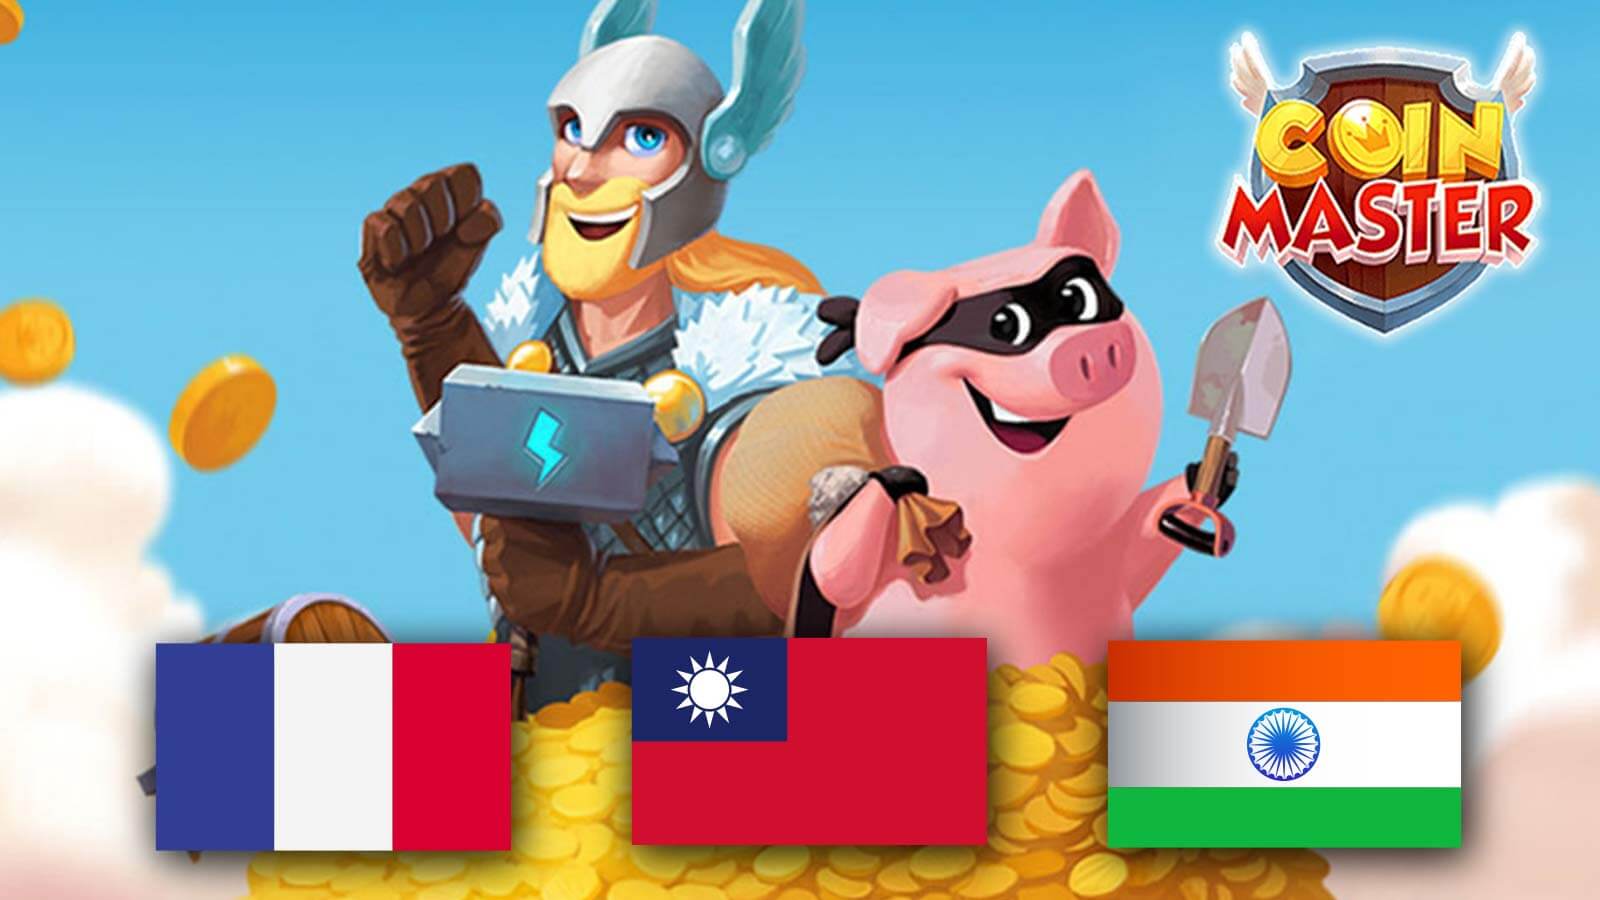 Top 3 Countries Where People Play Coinmaster